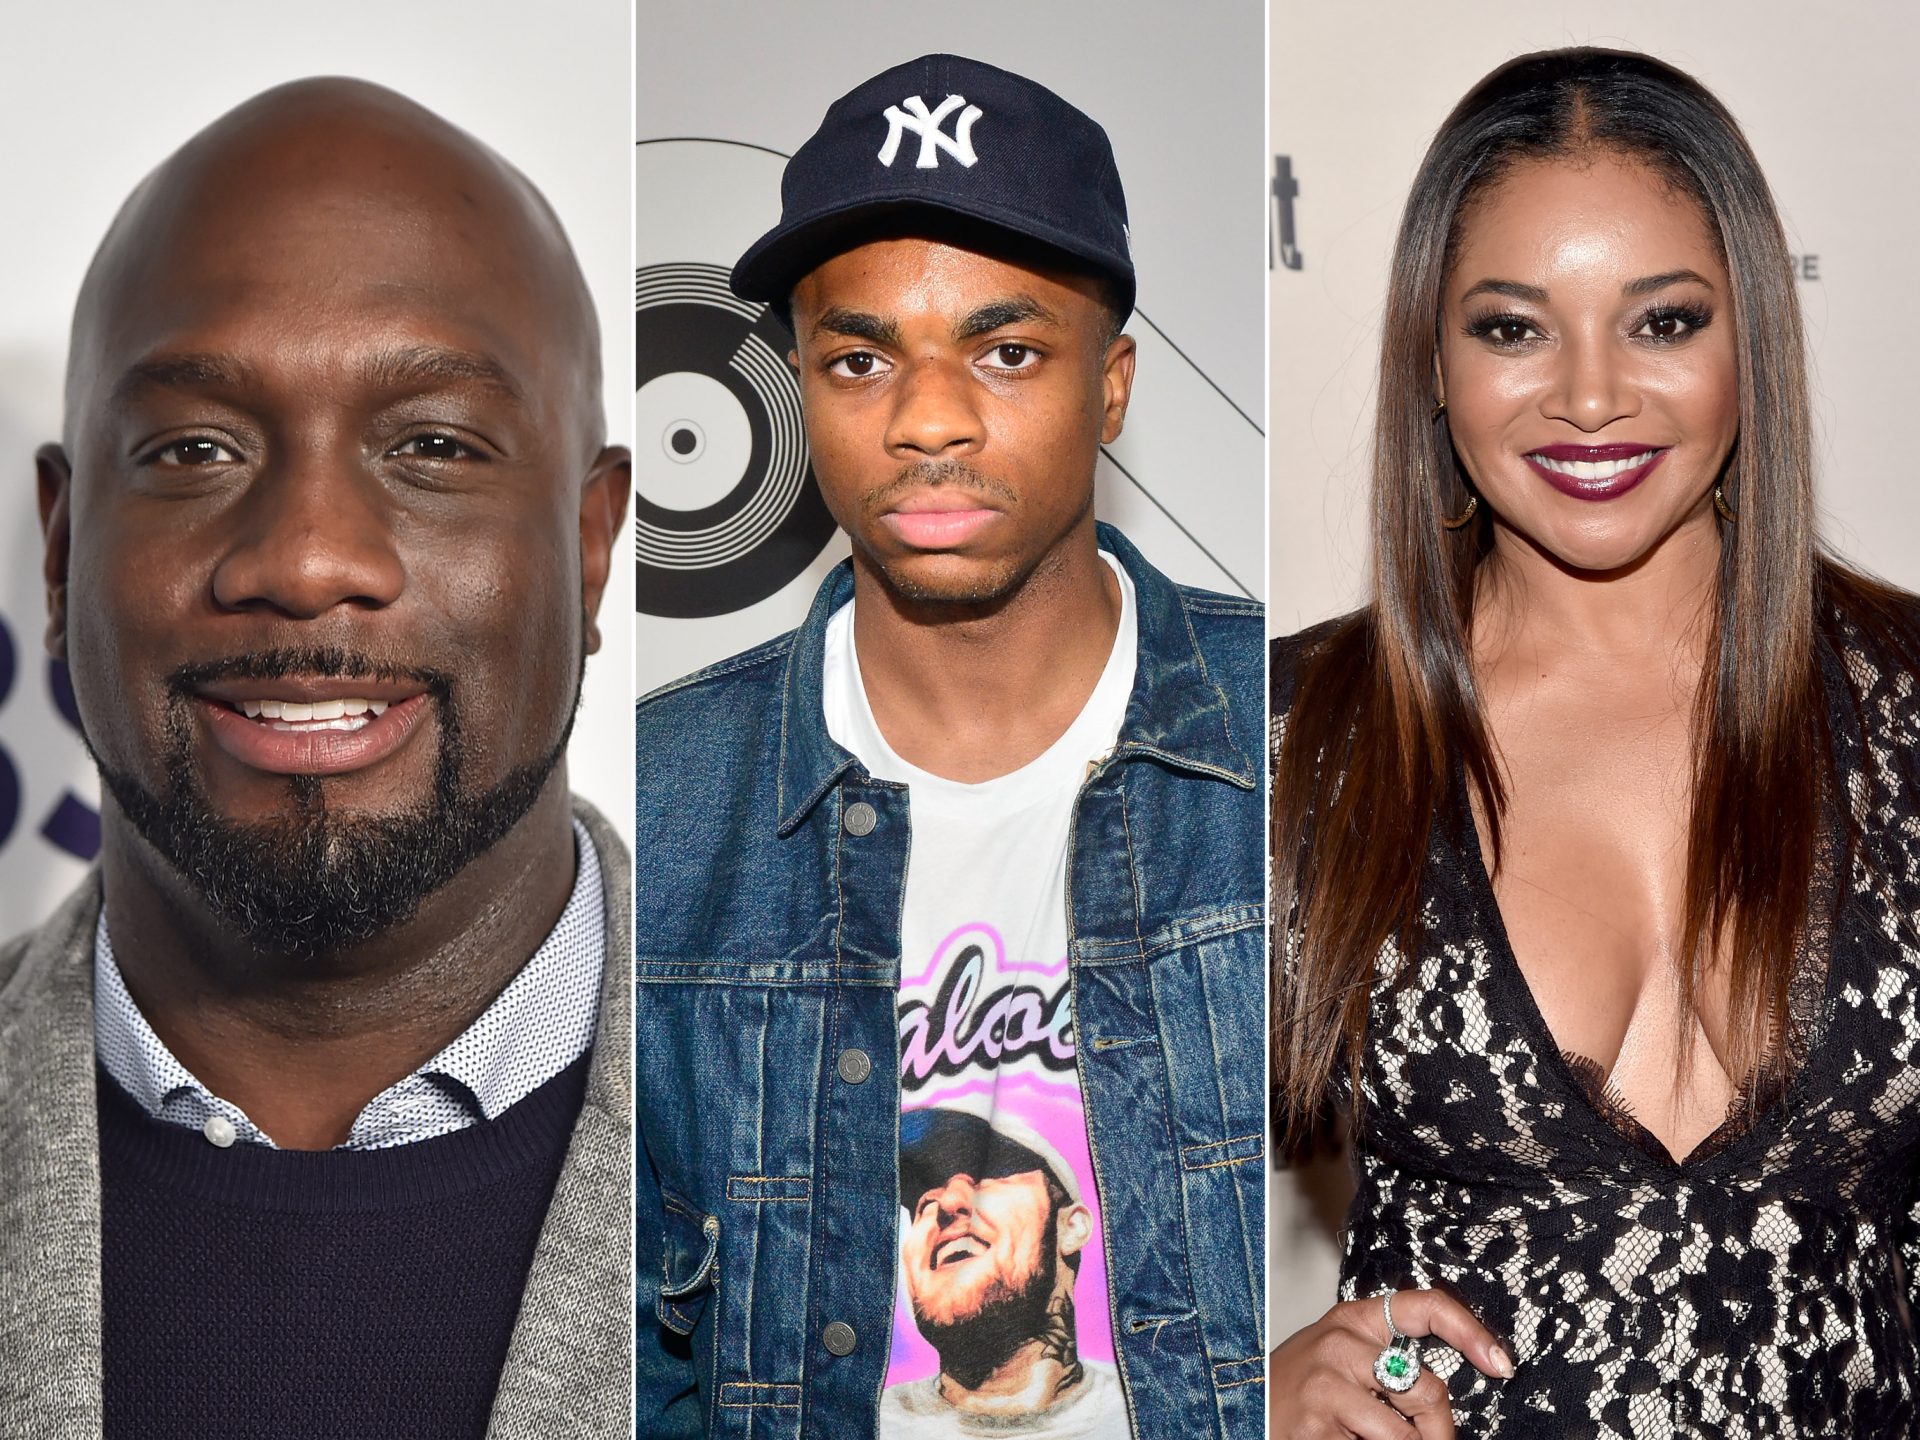 (Update) Richard T. Jones, Tamala Jones, Vince Staples & More Announced As Cast Members For The New Showtime Comedy Pilot Based On The 1999 Film ‘The Wood’